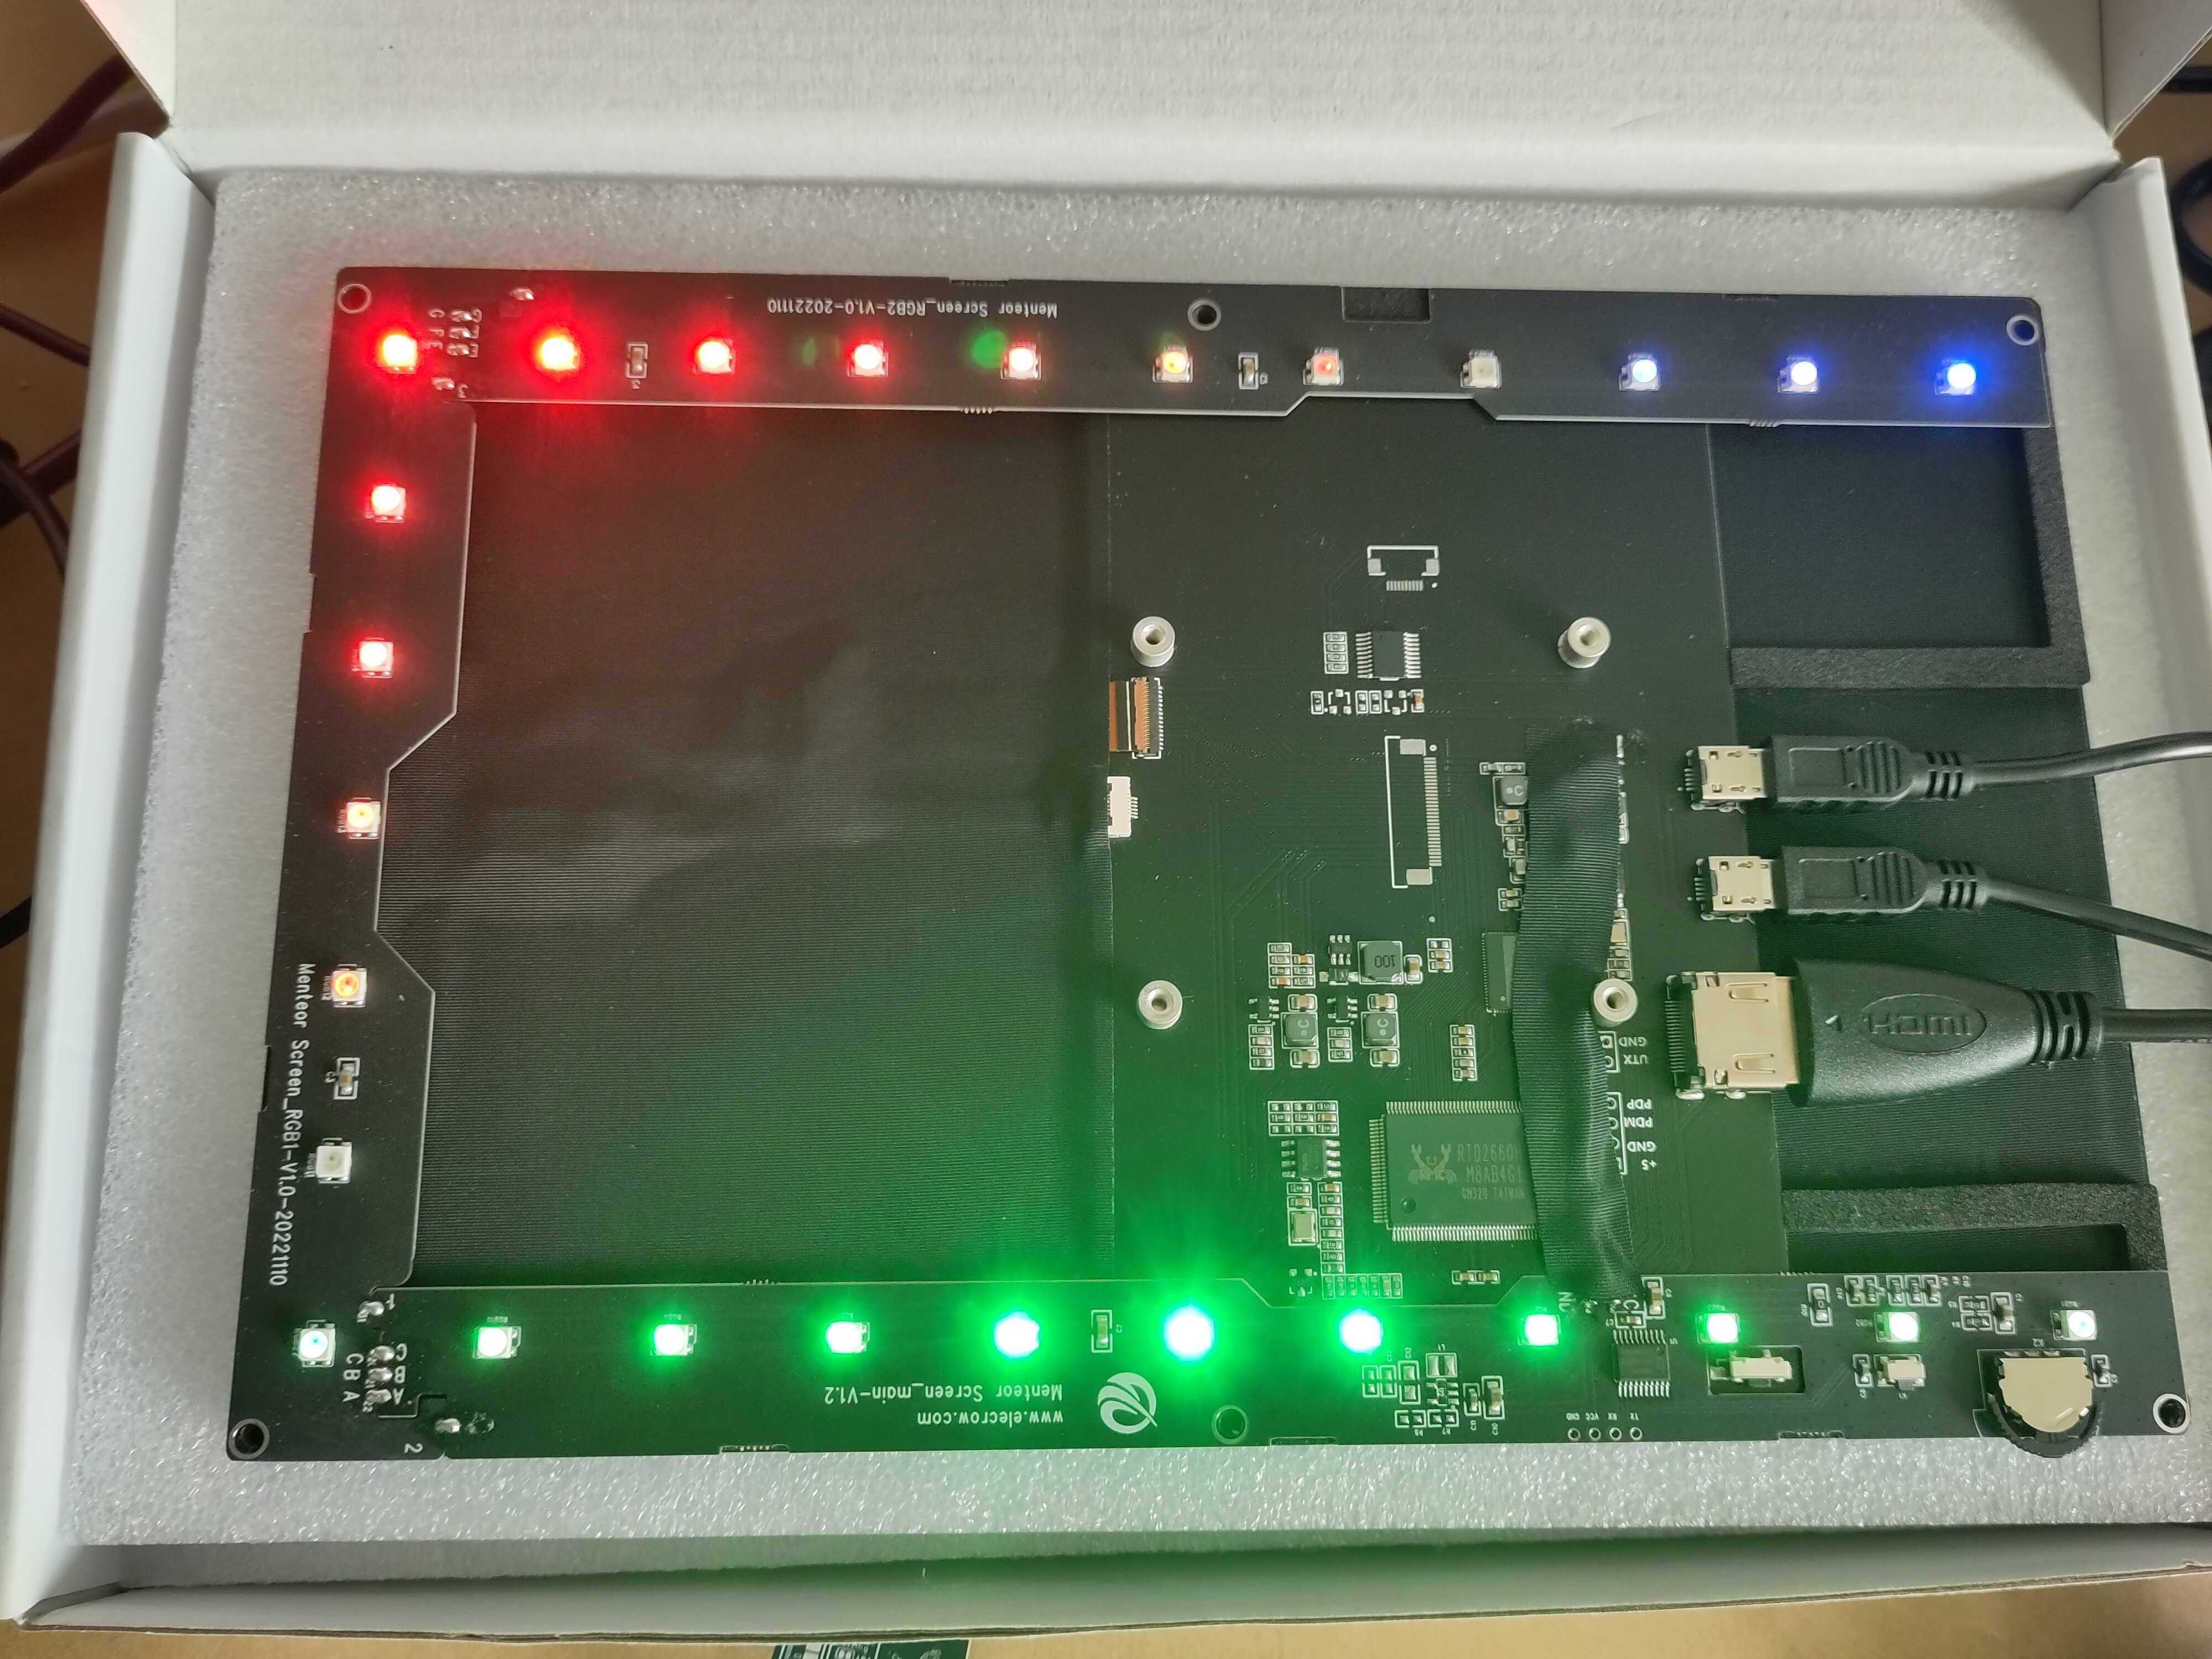 LEDs without the backplate